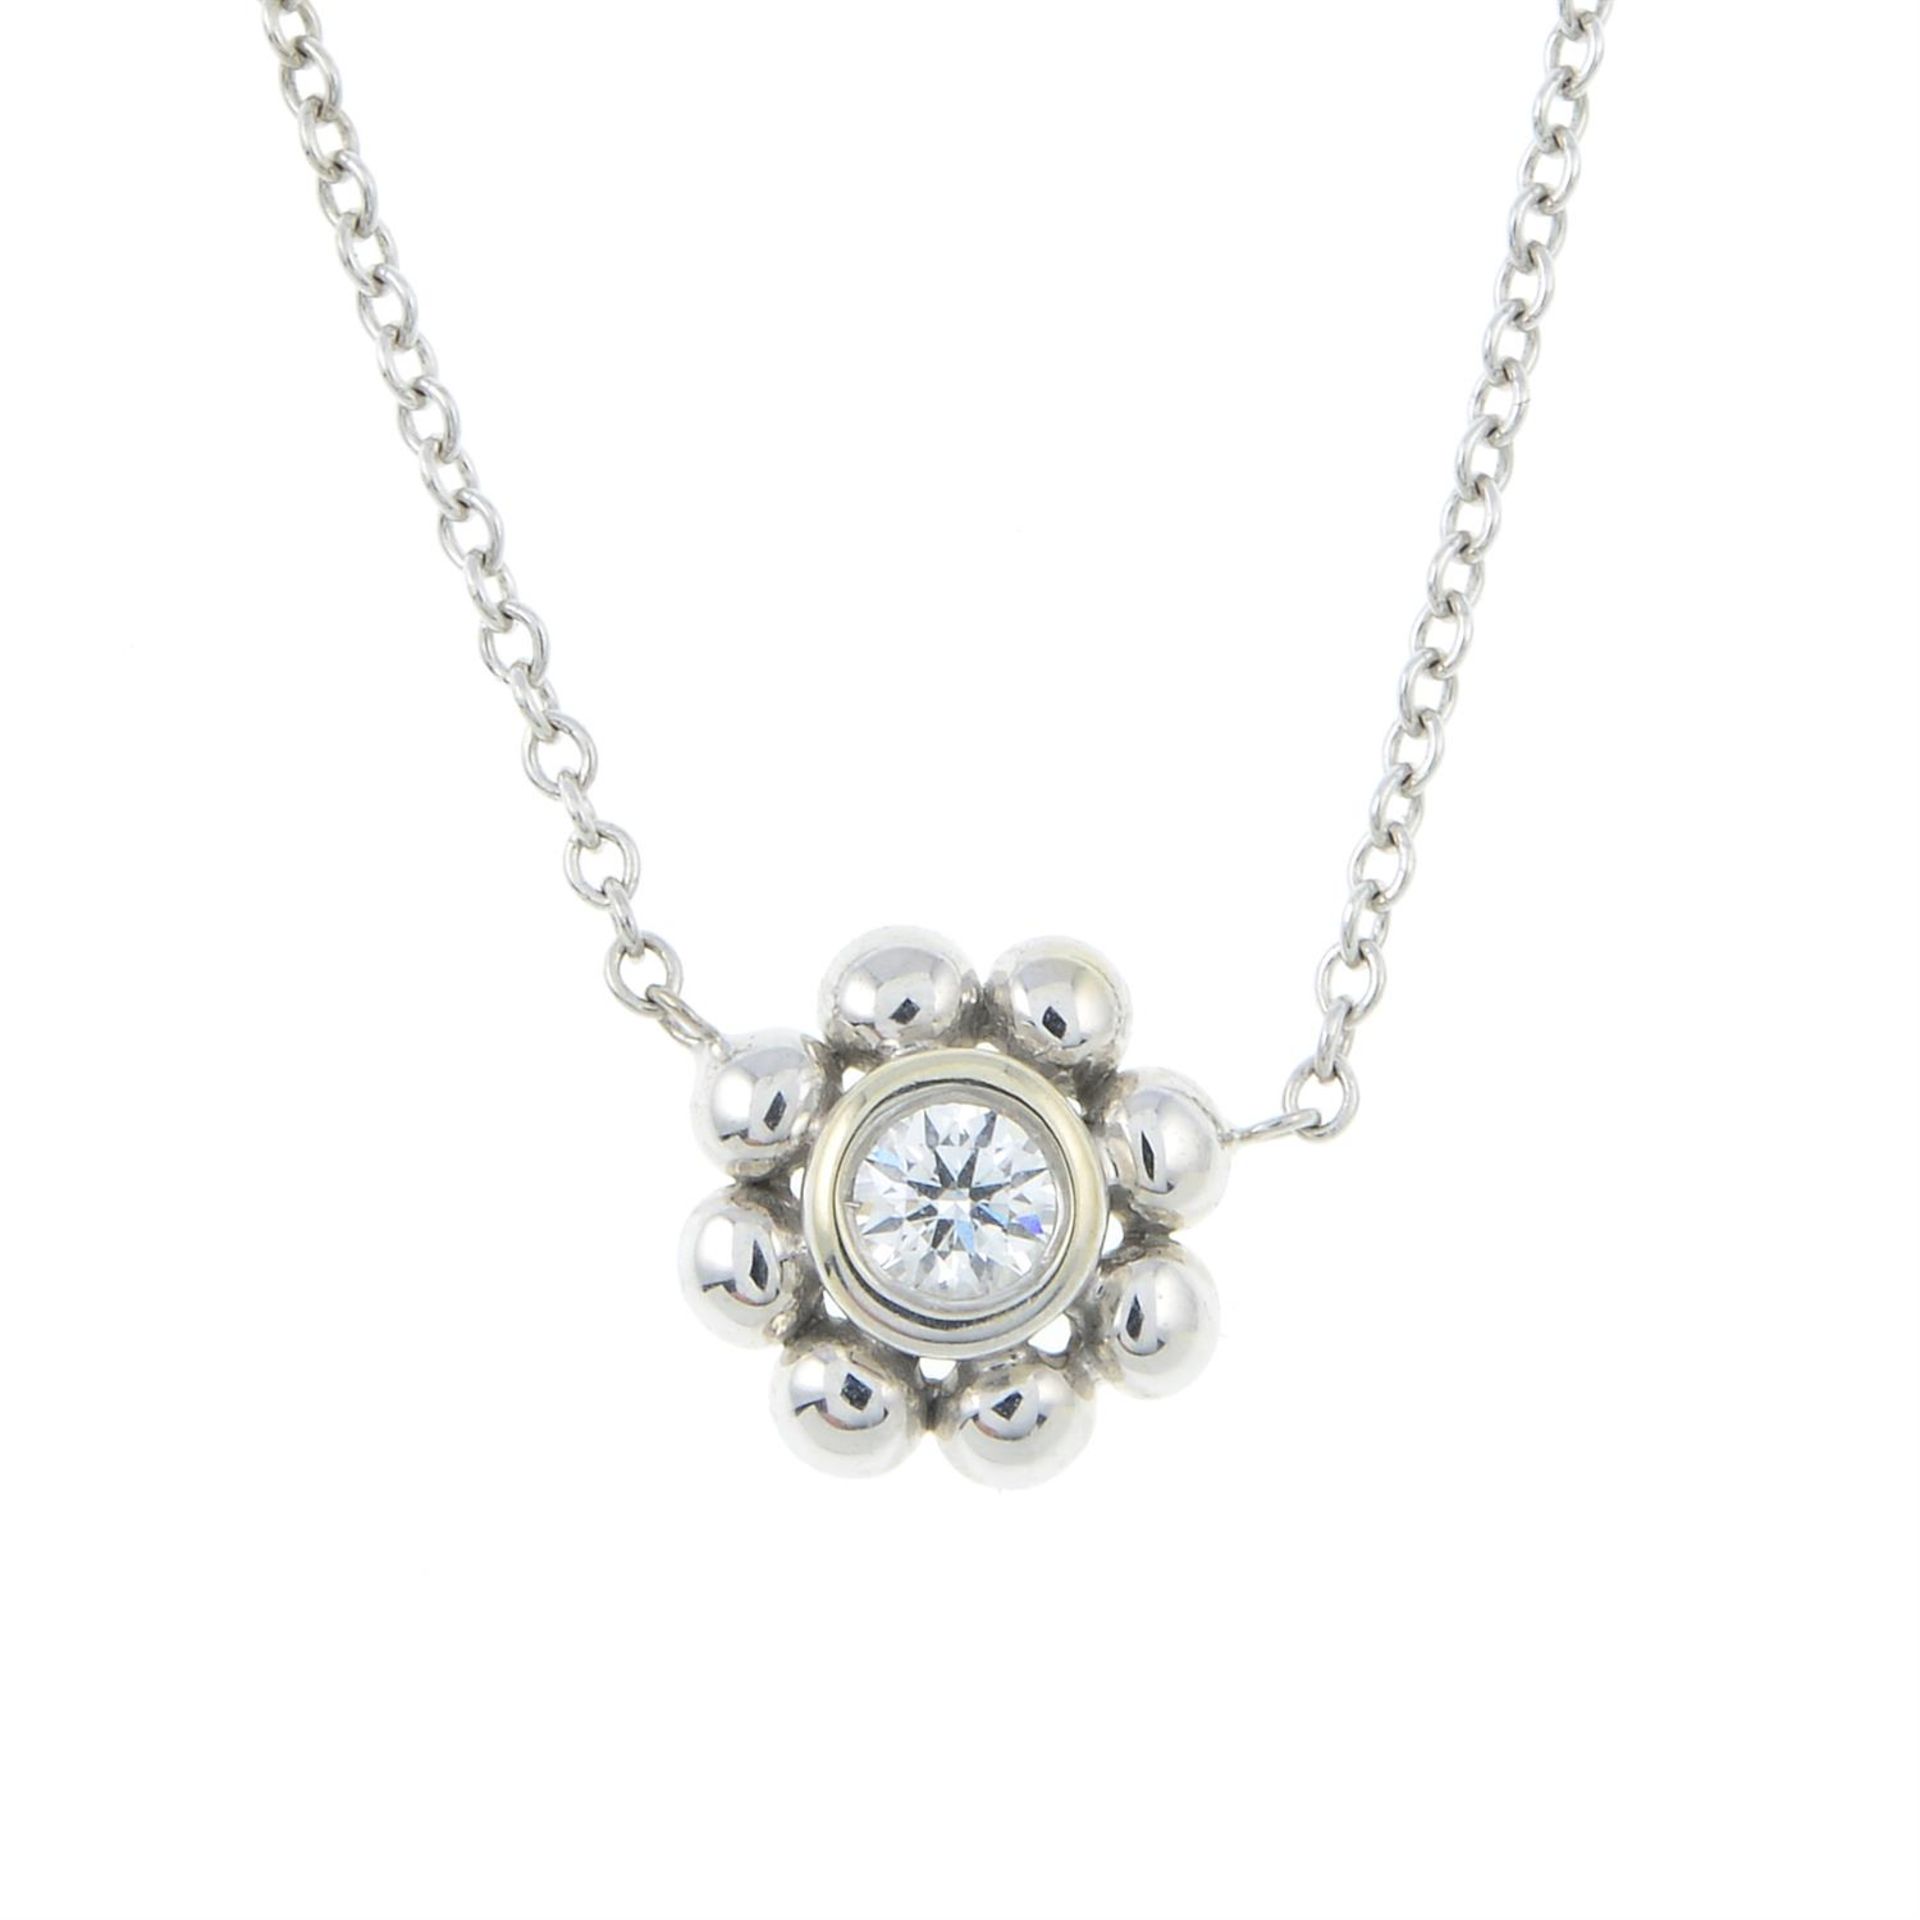 A diamond single-stone floral pendant, with chain, by Paloma Picasso for Tiffany & Co.